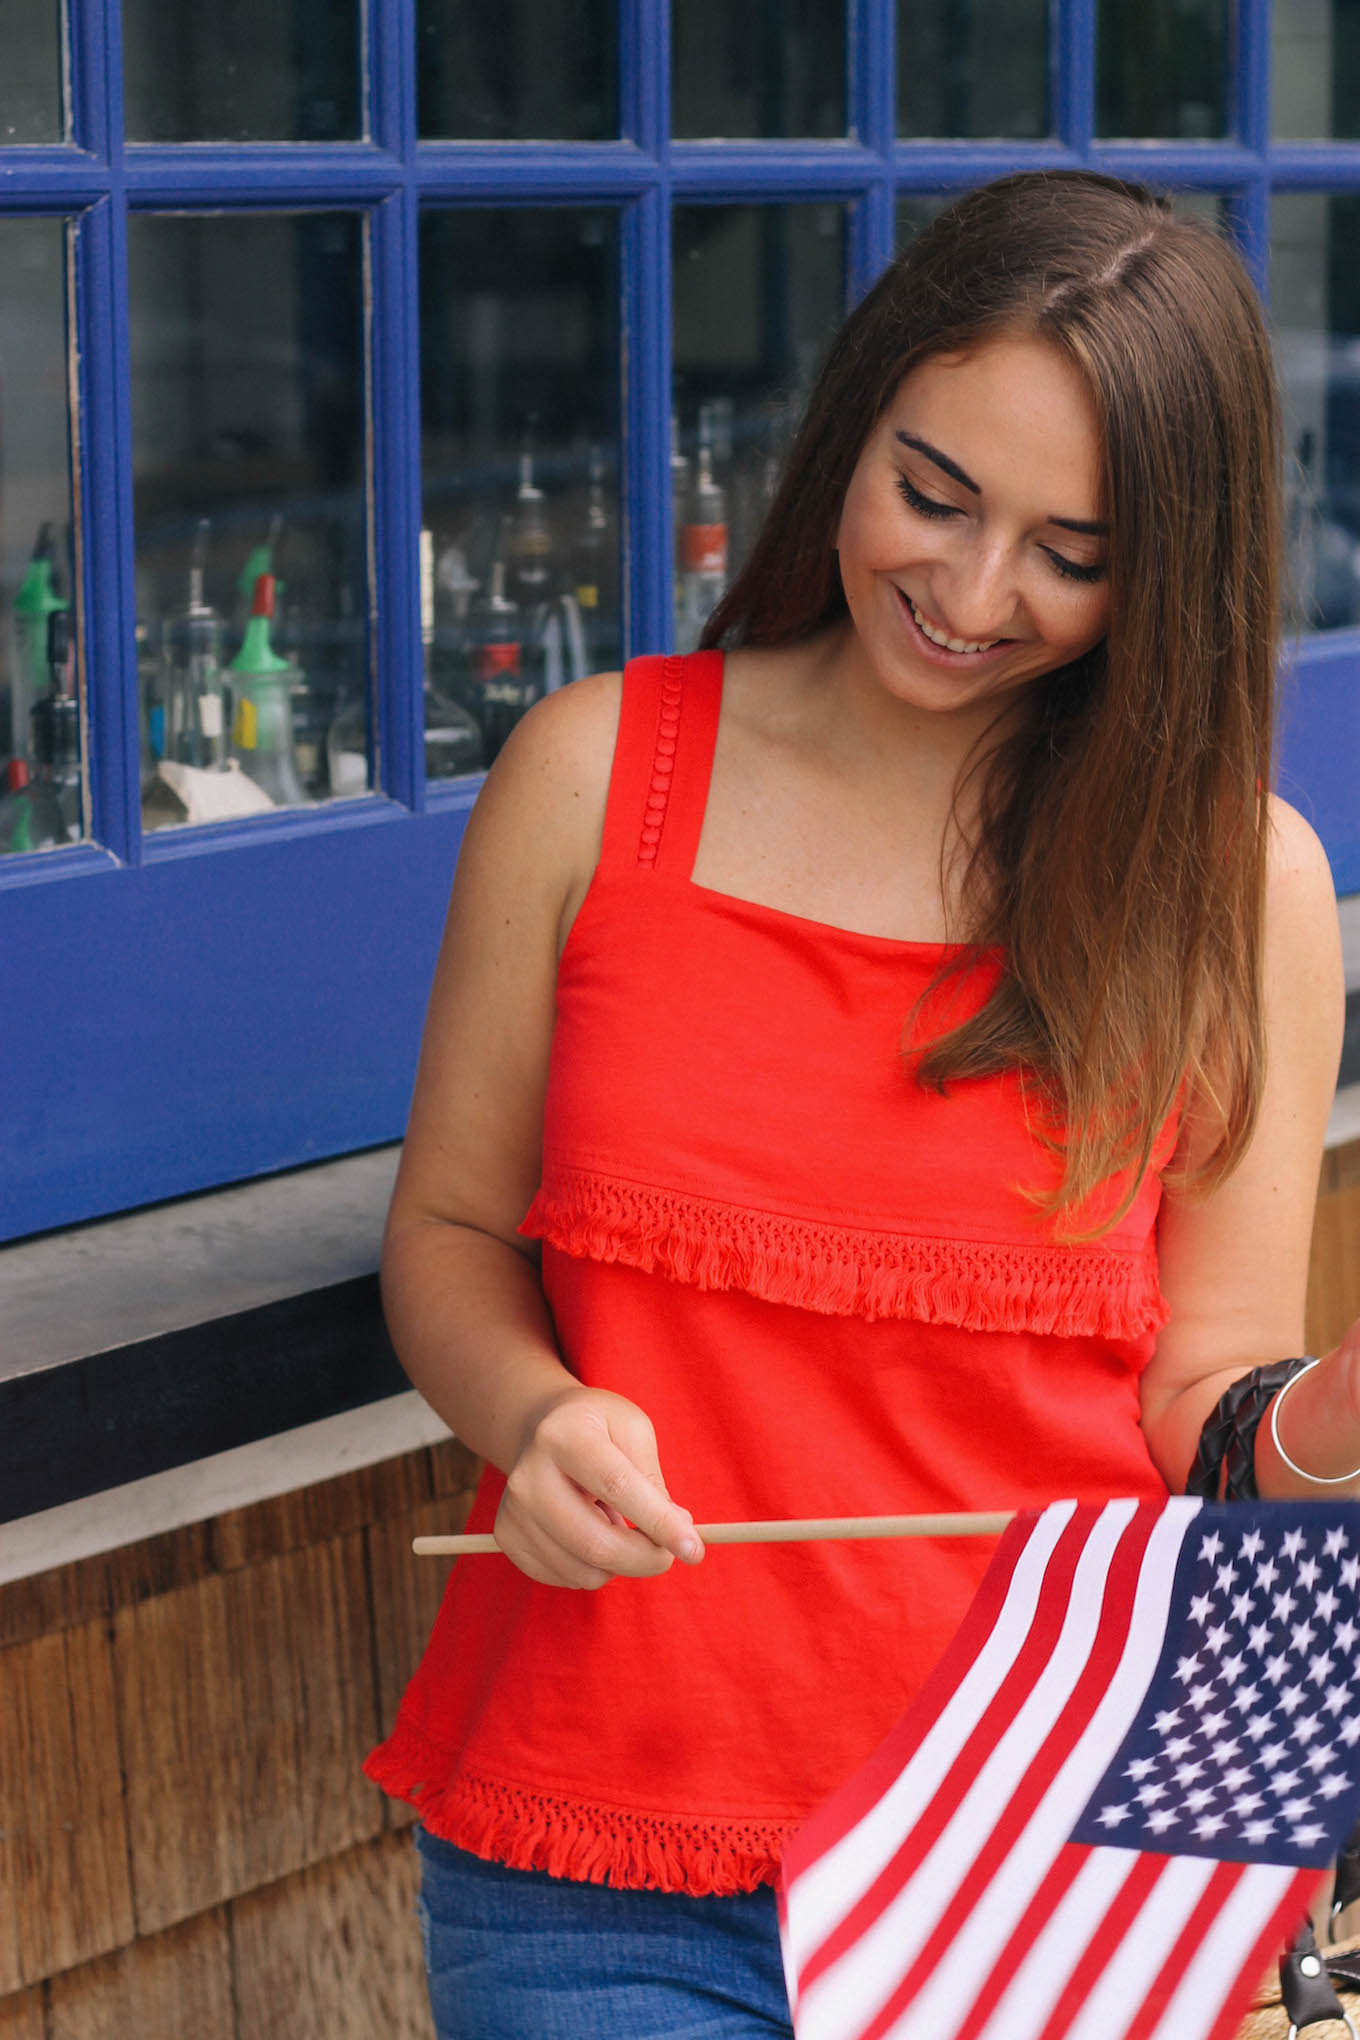 J.Crew Fourth of July Outfit Inspiration | The Coastal Confidence by Aubrey Yandow